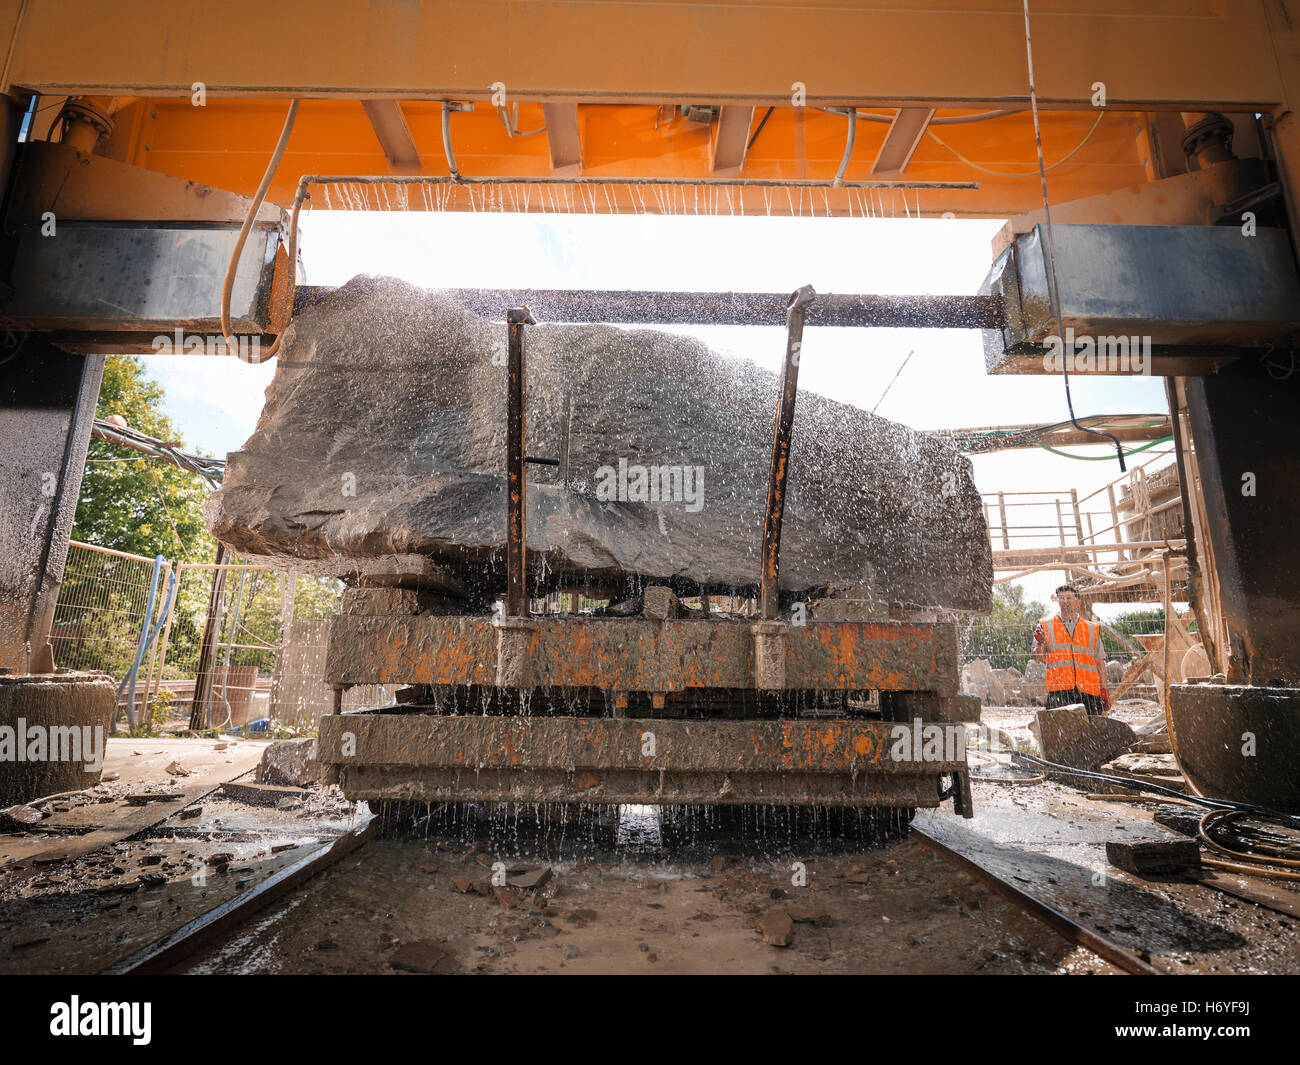 Large rock being cut in stone saw in quarry  Image downloaded by   at 10:33 on the 14/06/15 Stock Photo